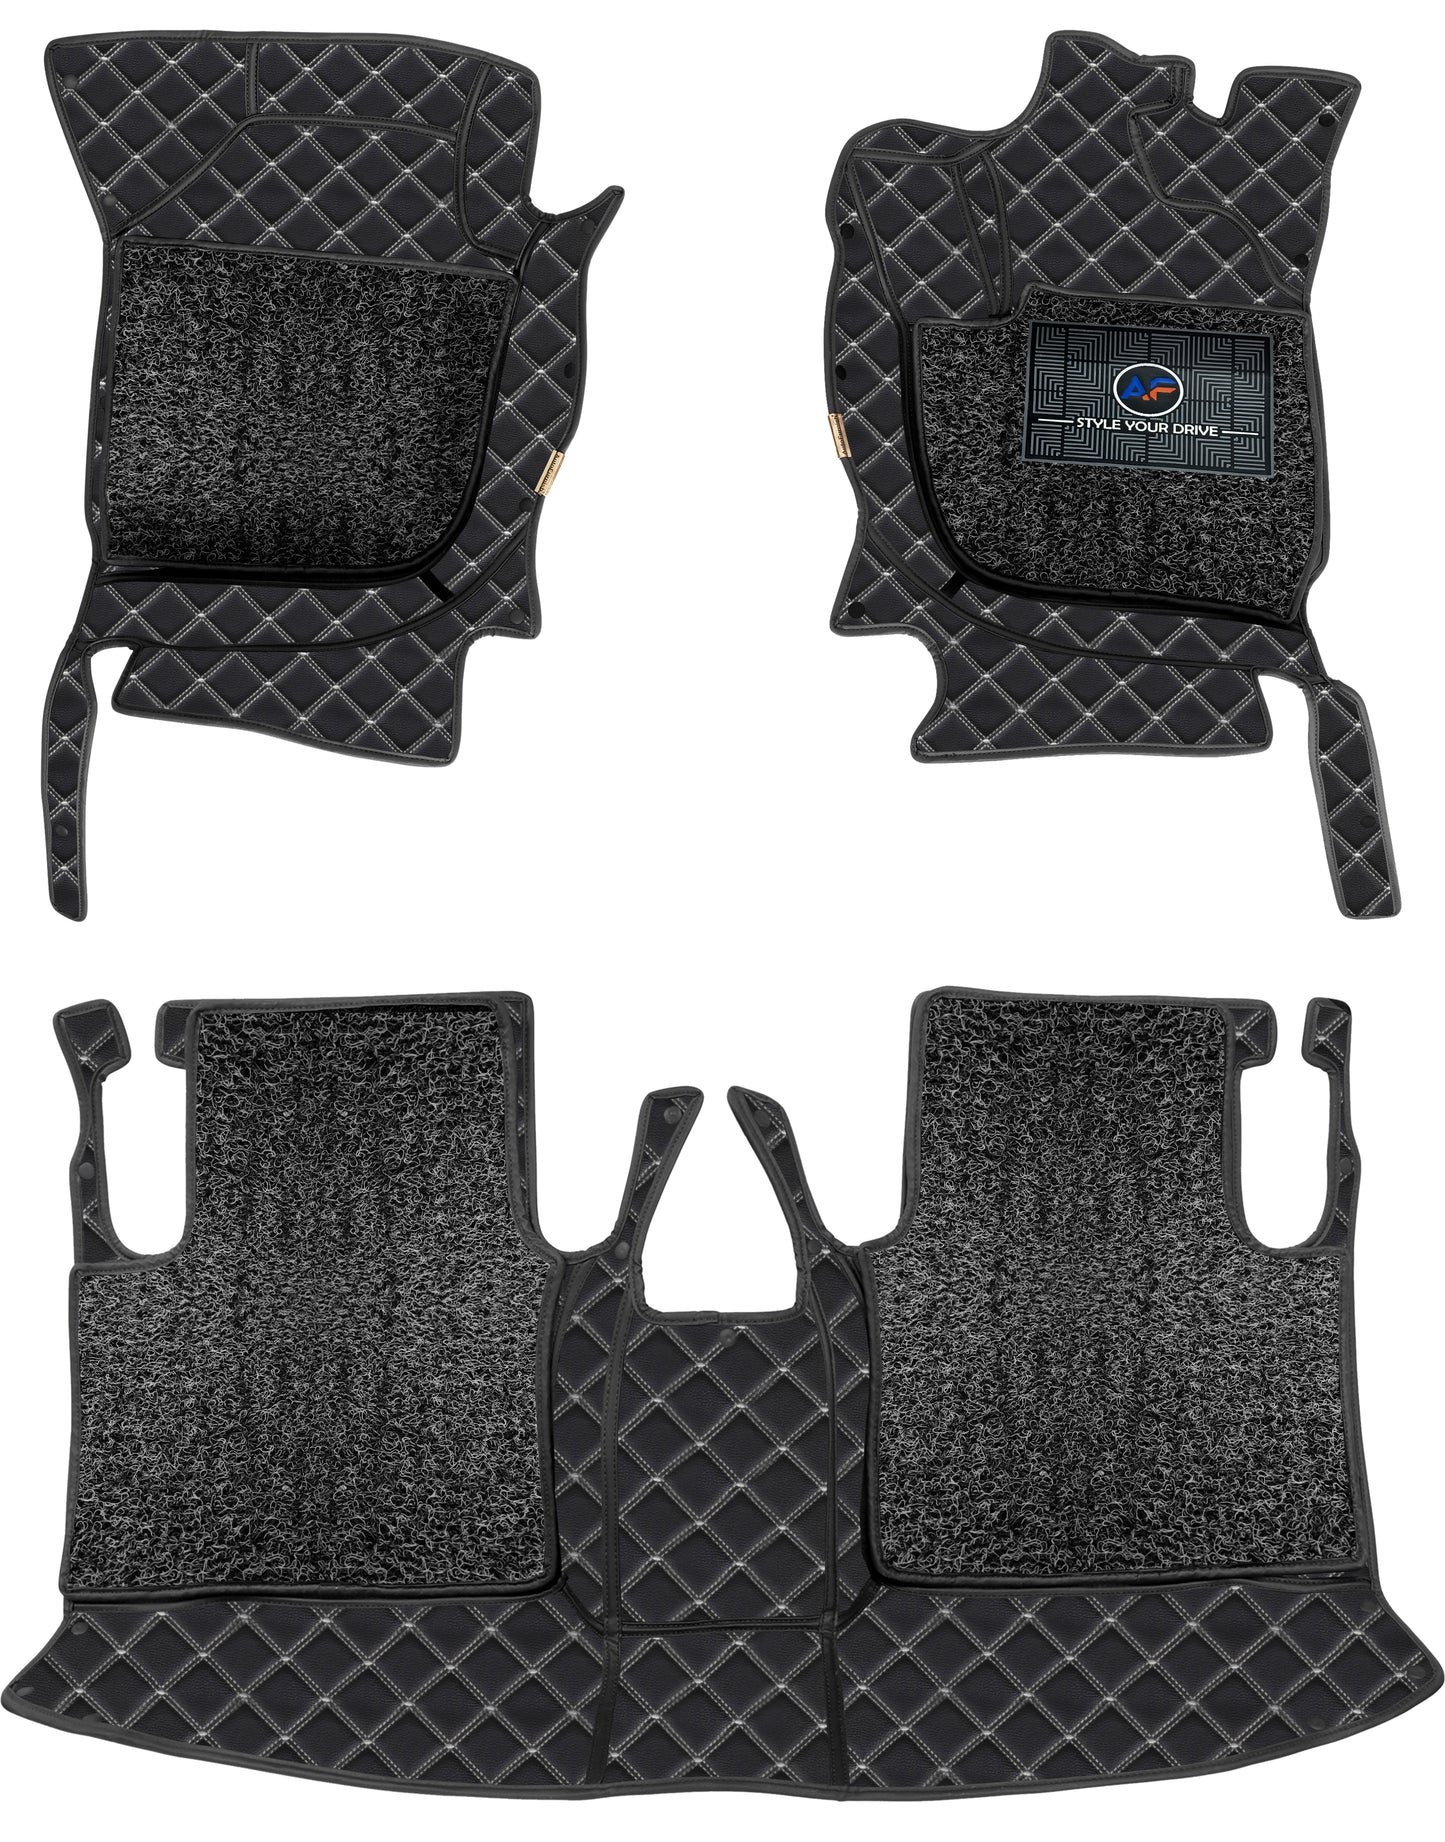 Hyundai i20 Elite 2014-19-7D Luxury Car Mat, All Weather Proof, Anti-Skid, 100% Waterproof & Odorless with Unique Diamond Fish Design (24mm Luxury PU Leather, 2 Rows)